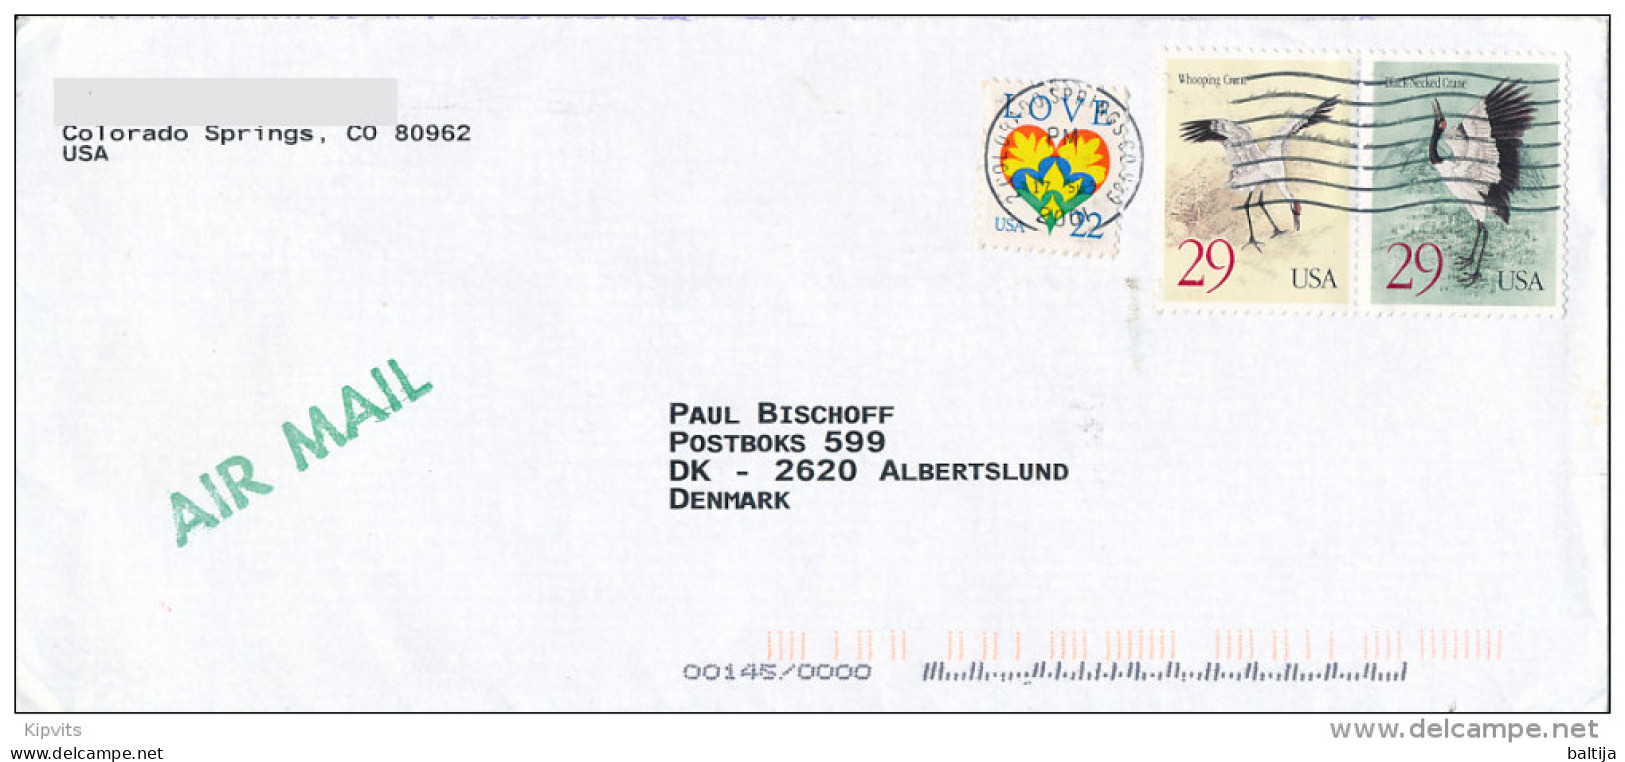 Airmail Cover Abroad / Joint Issue, China, Se-tenant, Crane - 17 September 2001 Colorado Springs CO 809 - Briefe U. Dokumente